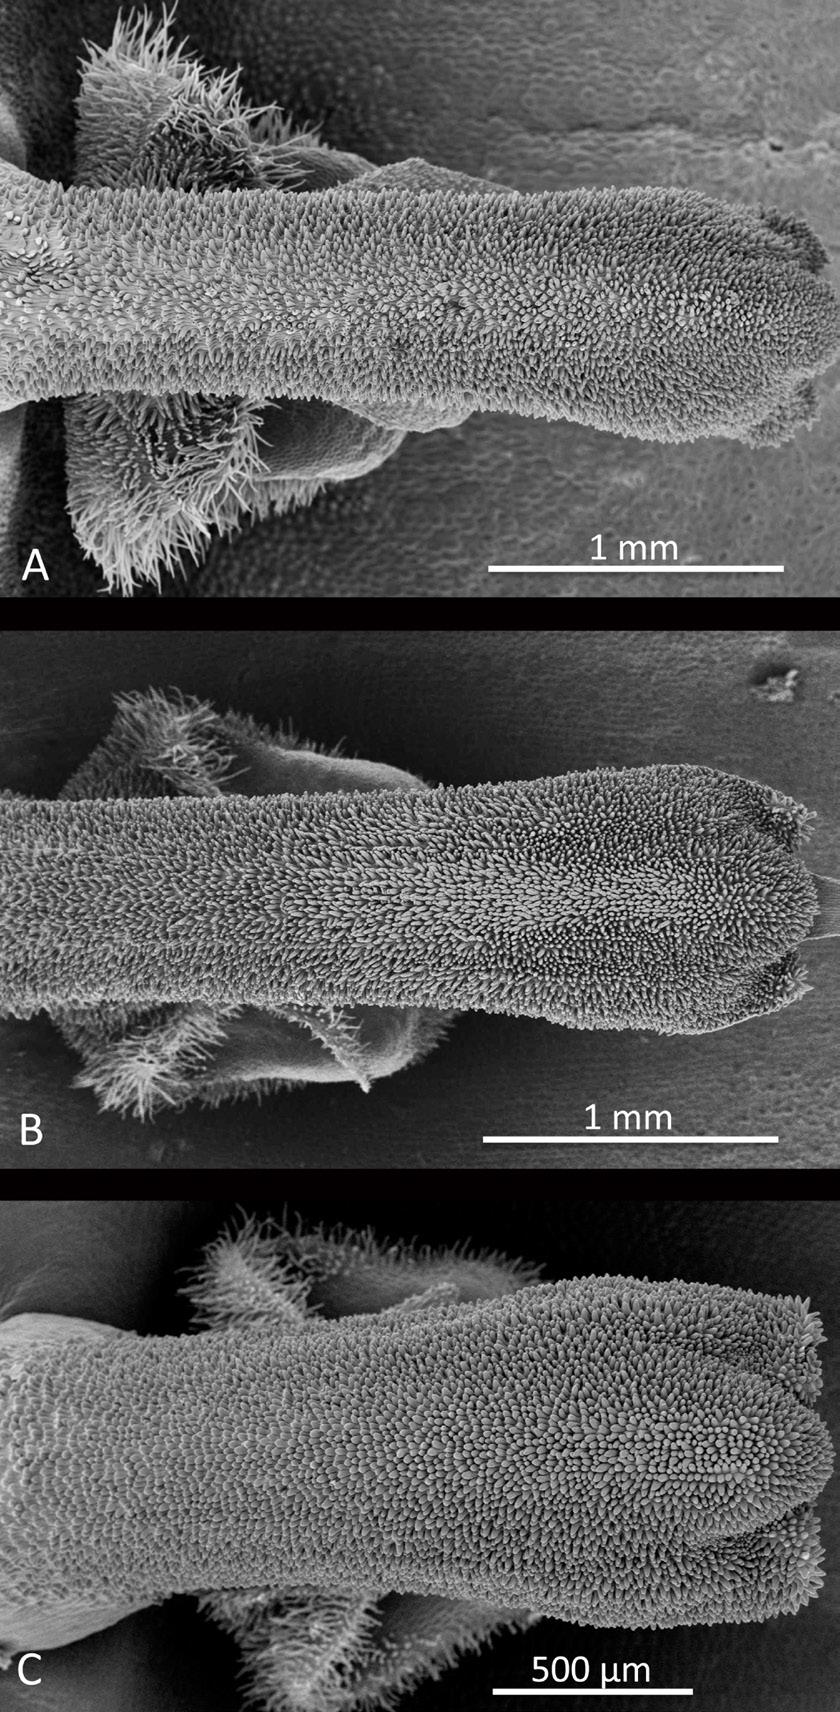 174 LANKESTERIANA P. nelsonii and P. microchila, that is not possessed by P. crocodiliceps, these three species can no longer be considered heterotypic synonyms of P. crocodiliceps. The three species, P.